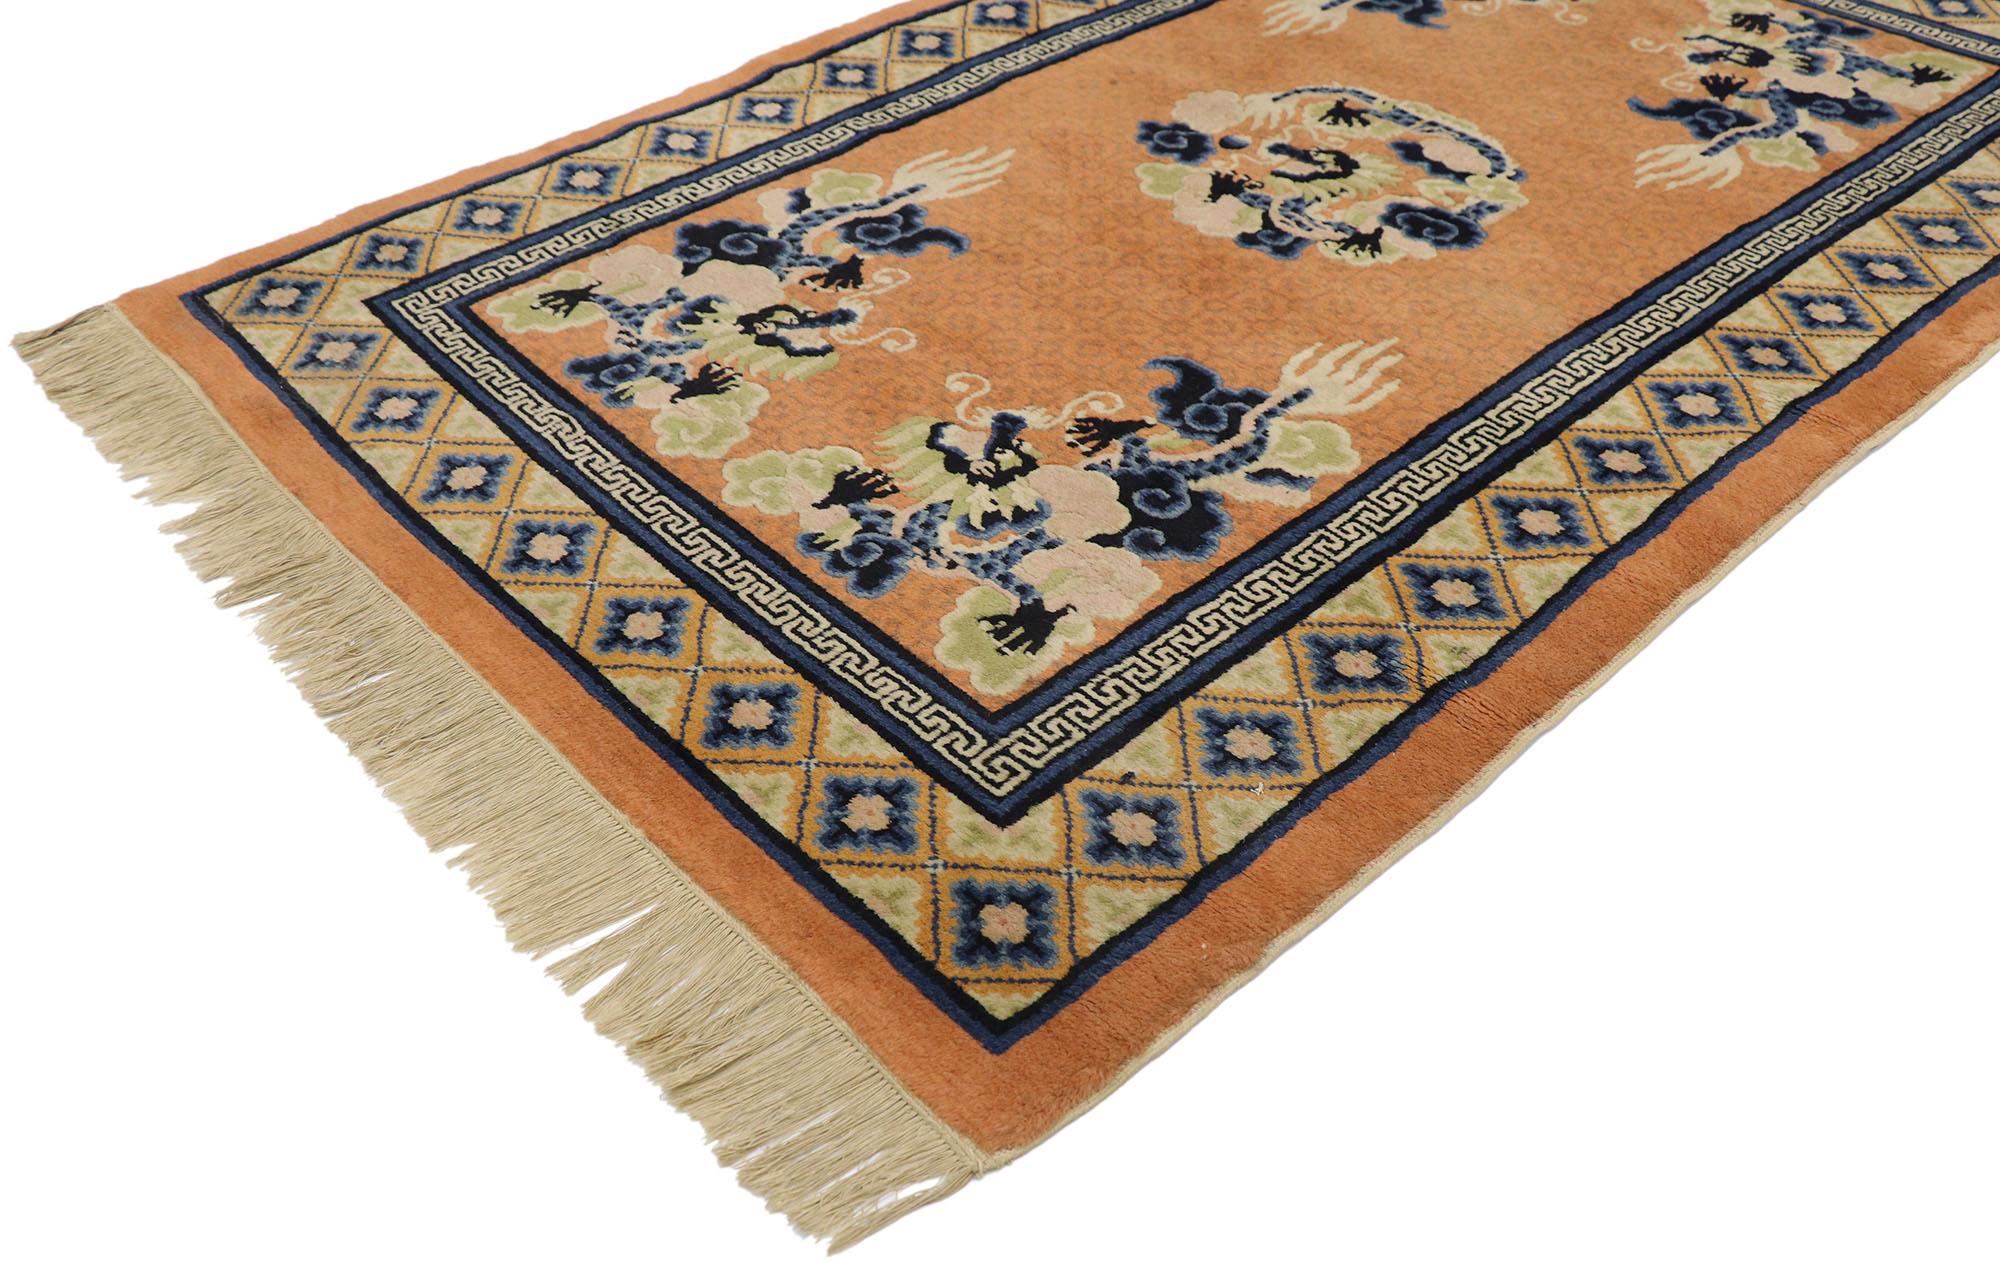 77589, antique Chinese Five Claw Dragon Pictorial rug. This hand-knotted wool antique Chinese pictorial rug depicts a five claw dragon design. The abrashed orange field features an all-over geometric lattice composed of small squares. Taking center